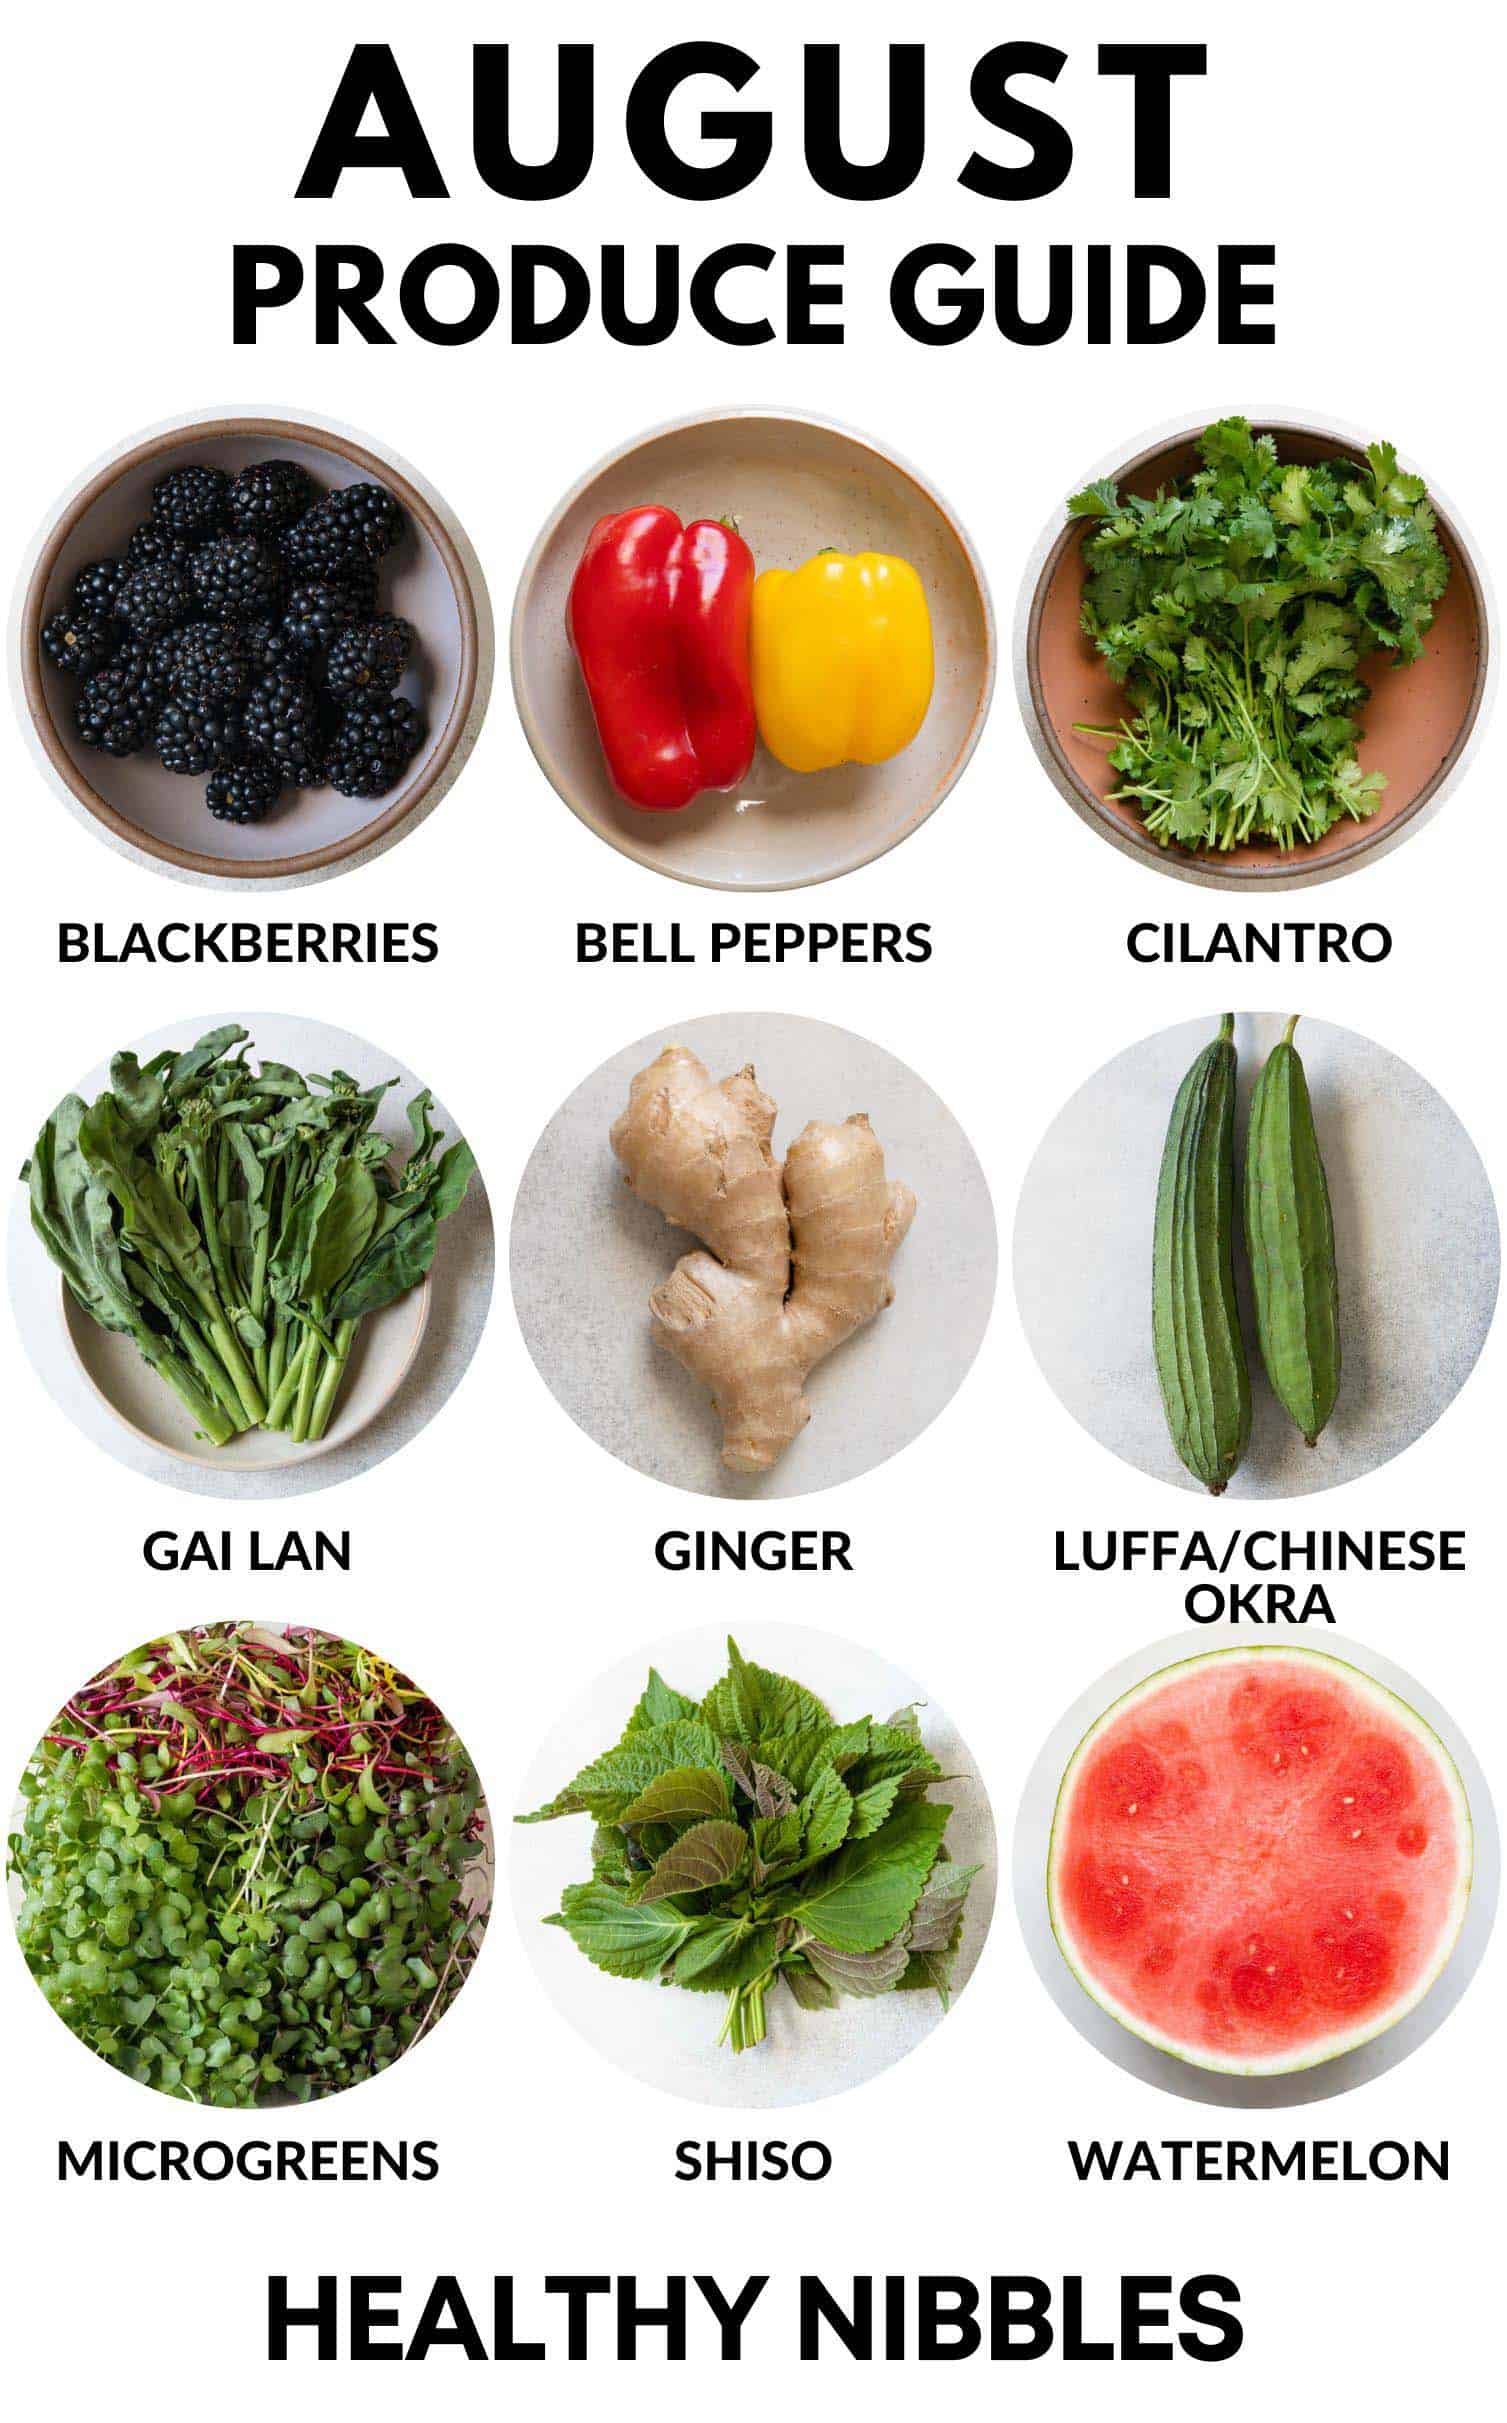 August Produce Guide: blackberries, bell peppers, cilantro, etc.